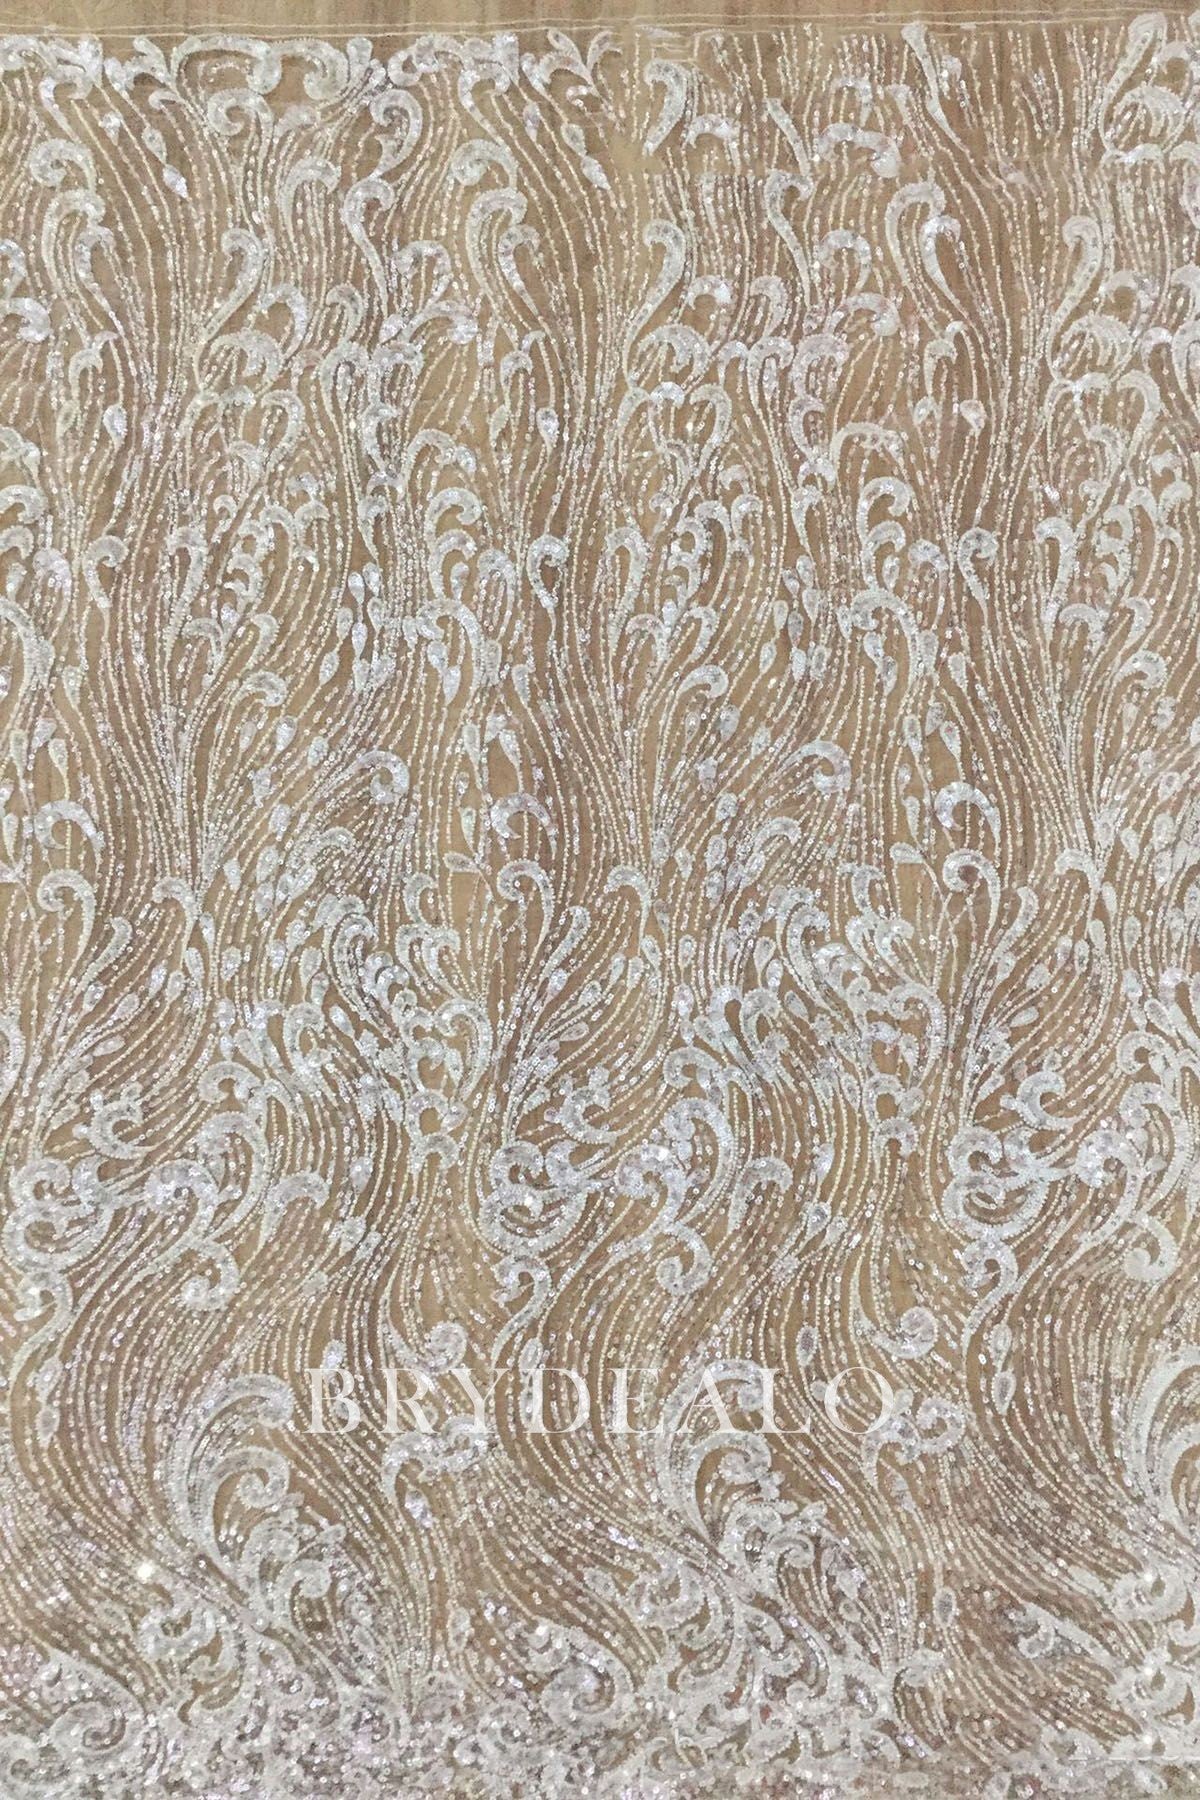 Wholesale Luxurious Beaded Wave Pattern Lace Fabric